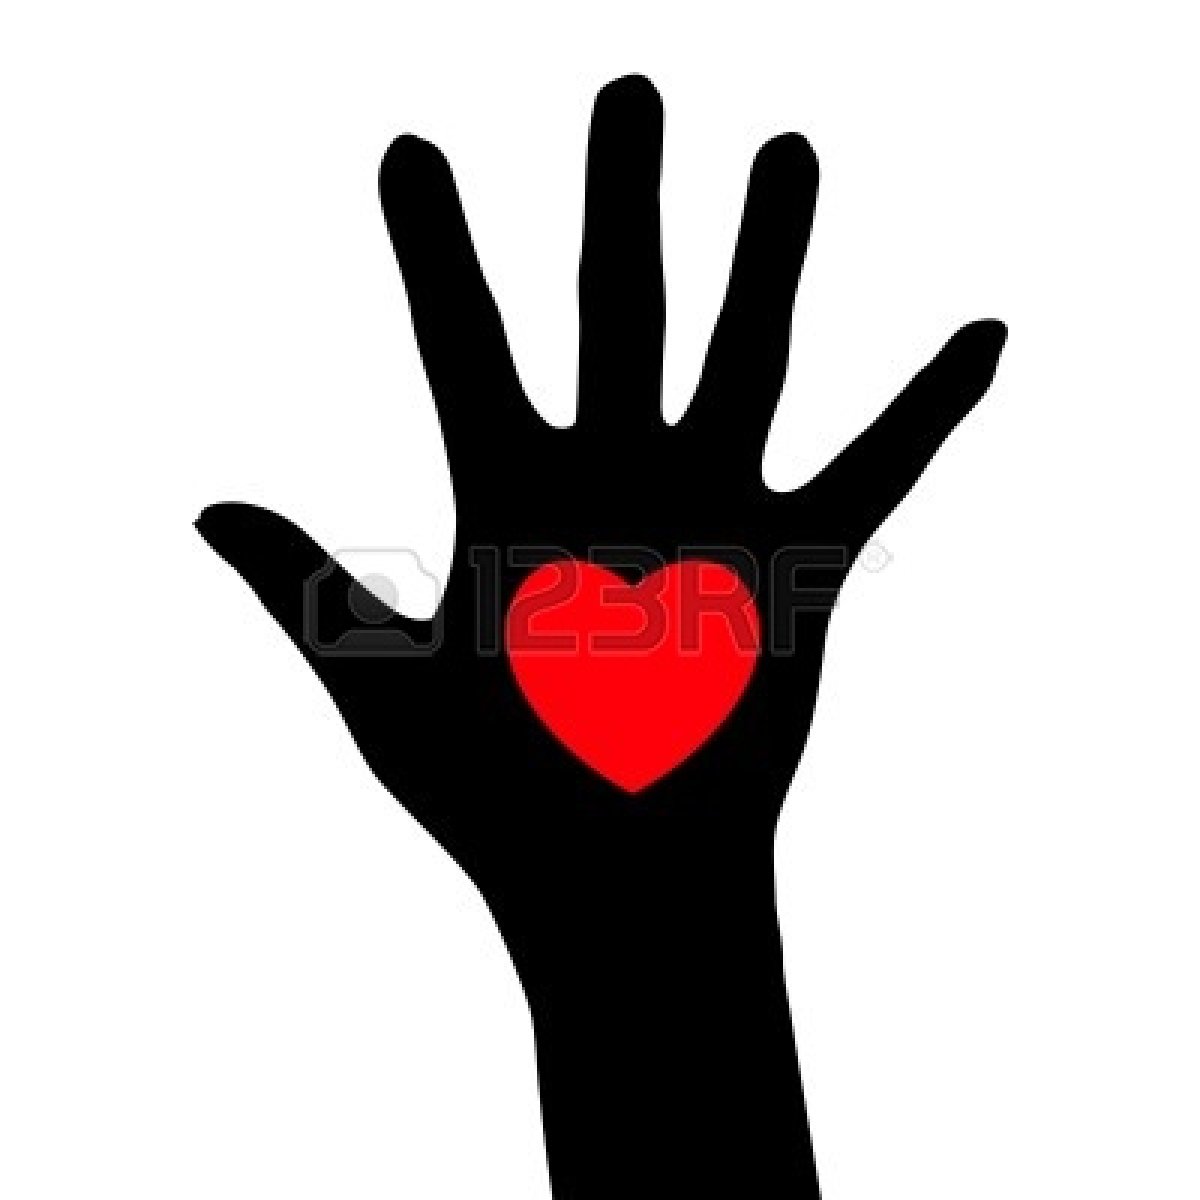 Helping Hands Clipart Black And White Helping Hand Clipart Black And